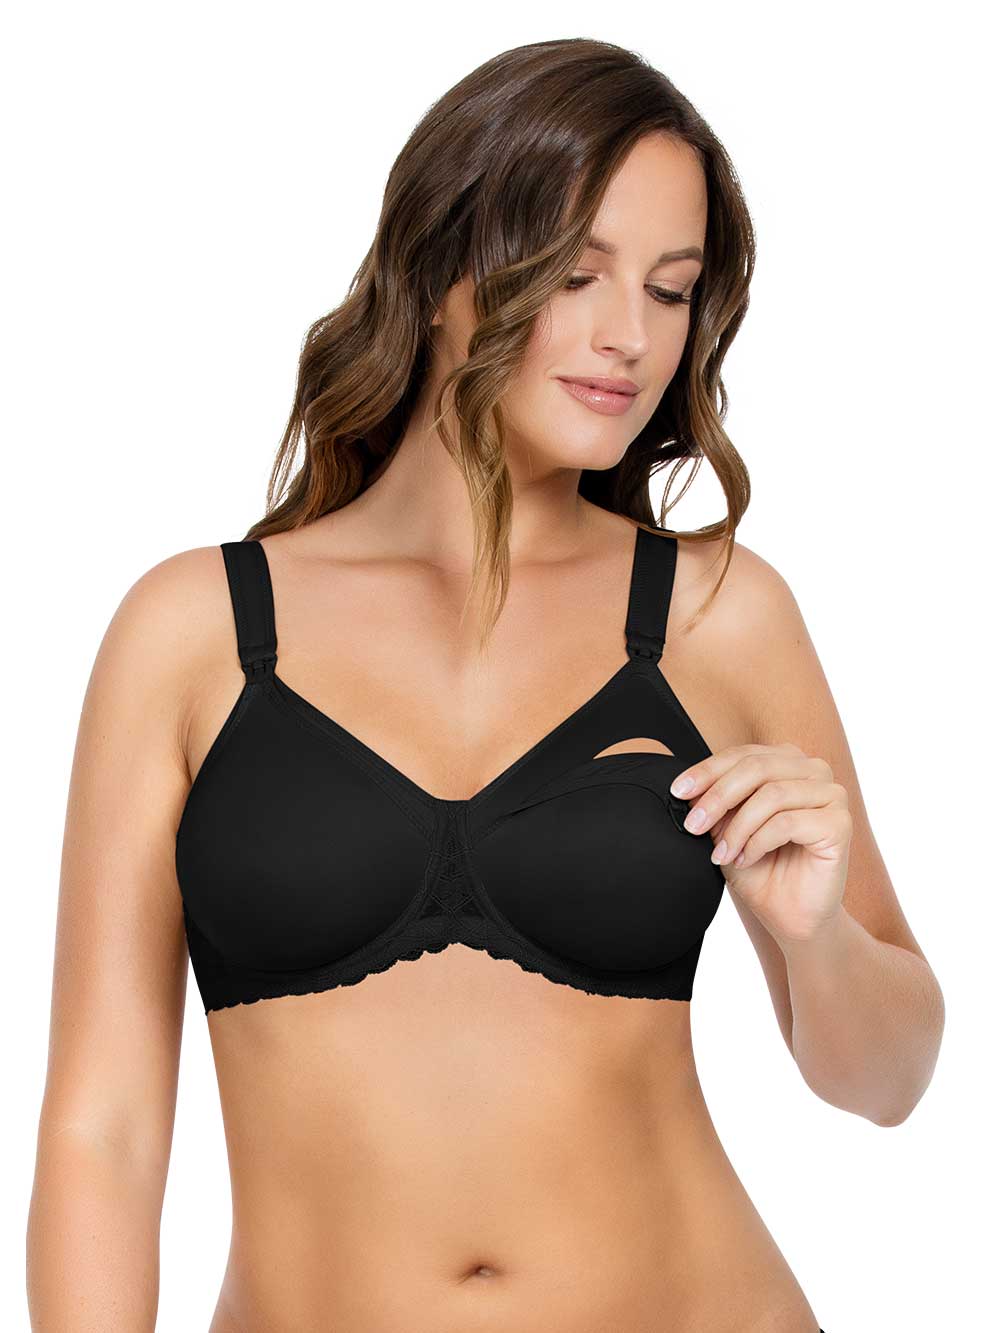 32C Bras: Bra Cup Size for 32C Boobs and Breast Size 标签语法 - HauteFlair